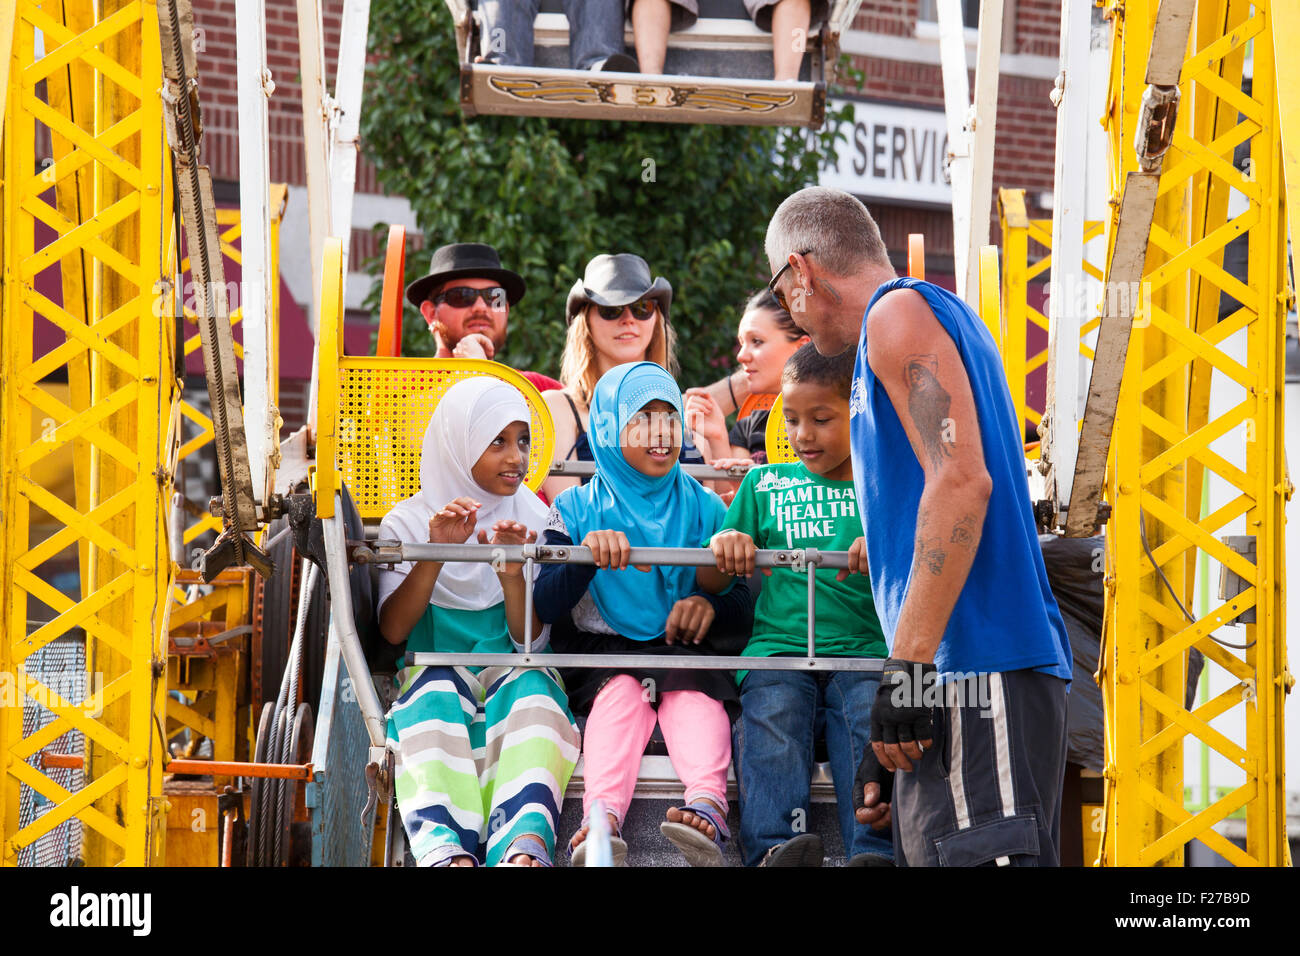 Hamtramck, Michigan - A worker fastens children into a ferris wheel during Hamtramck's Labor Day festival. Stock Photo